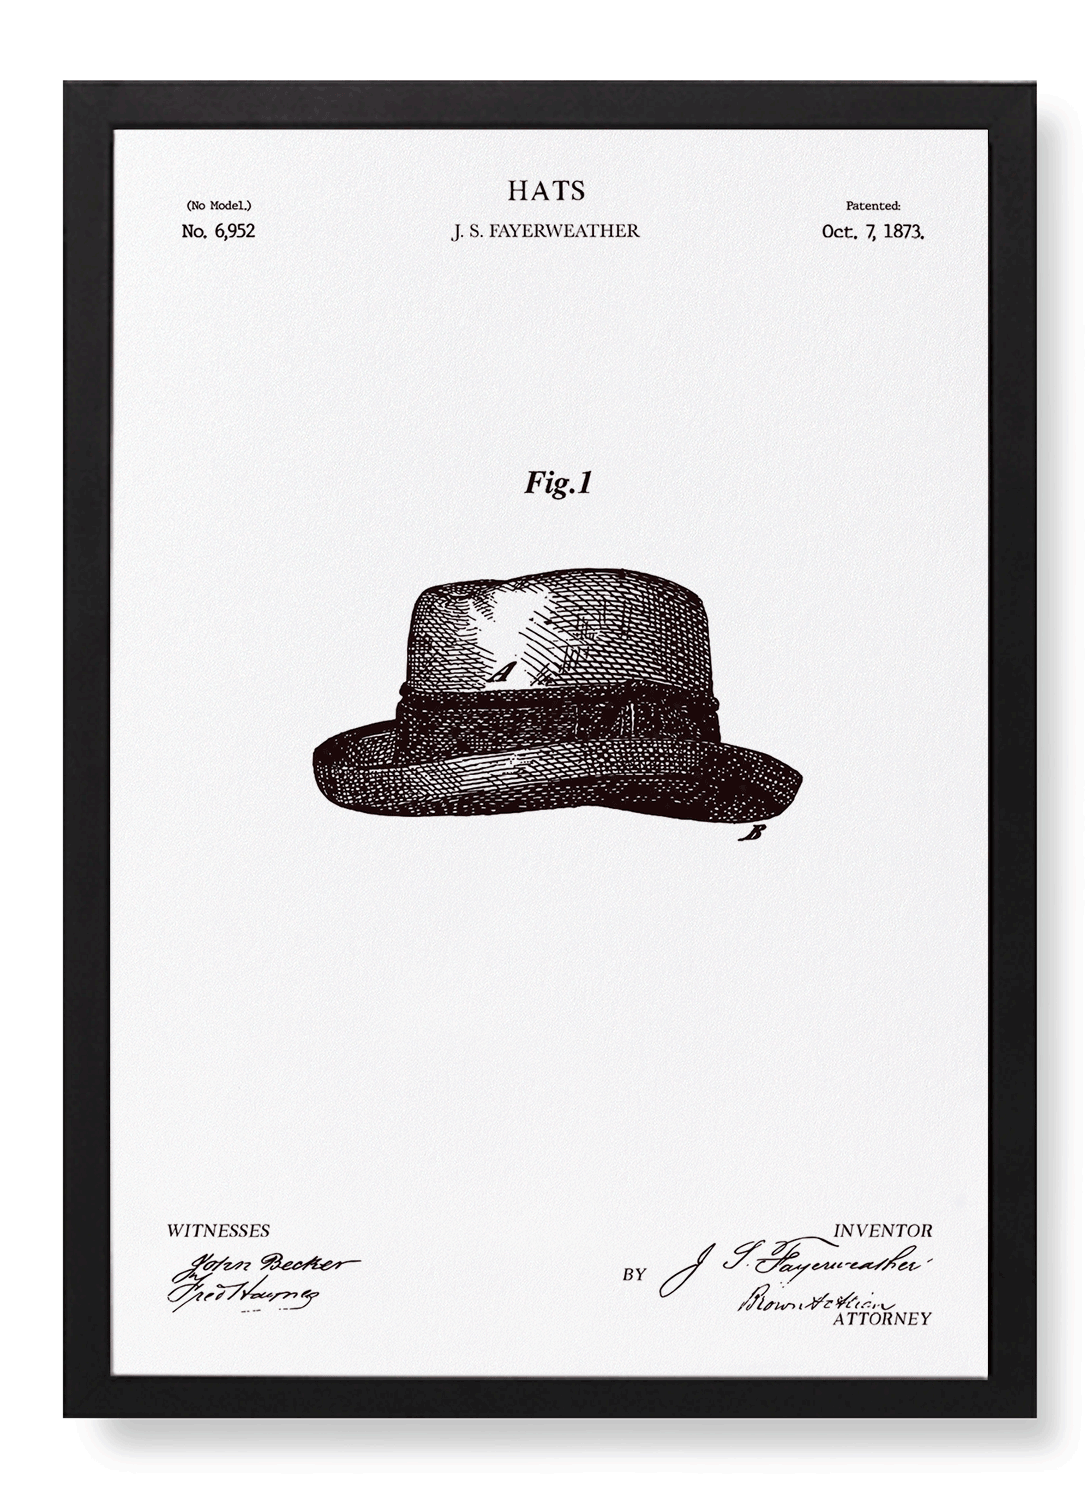 PATENT OF HATS (1873)